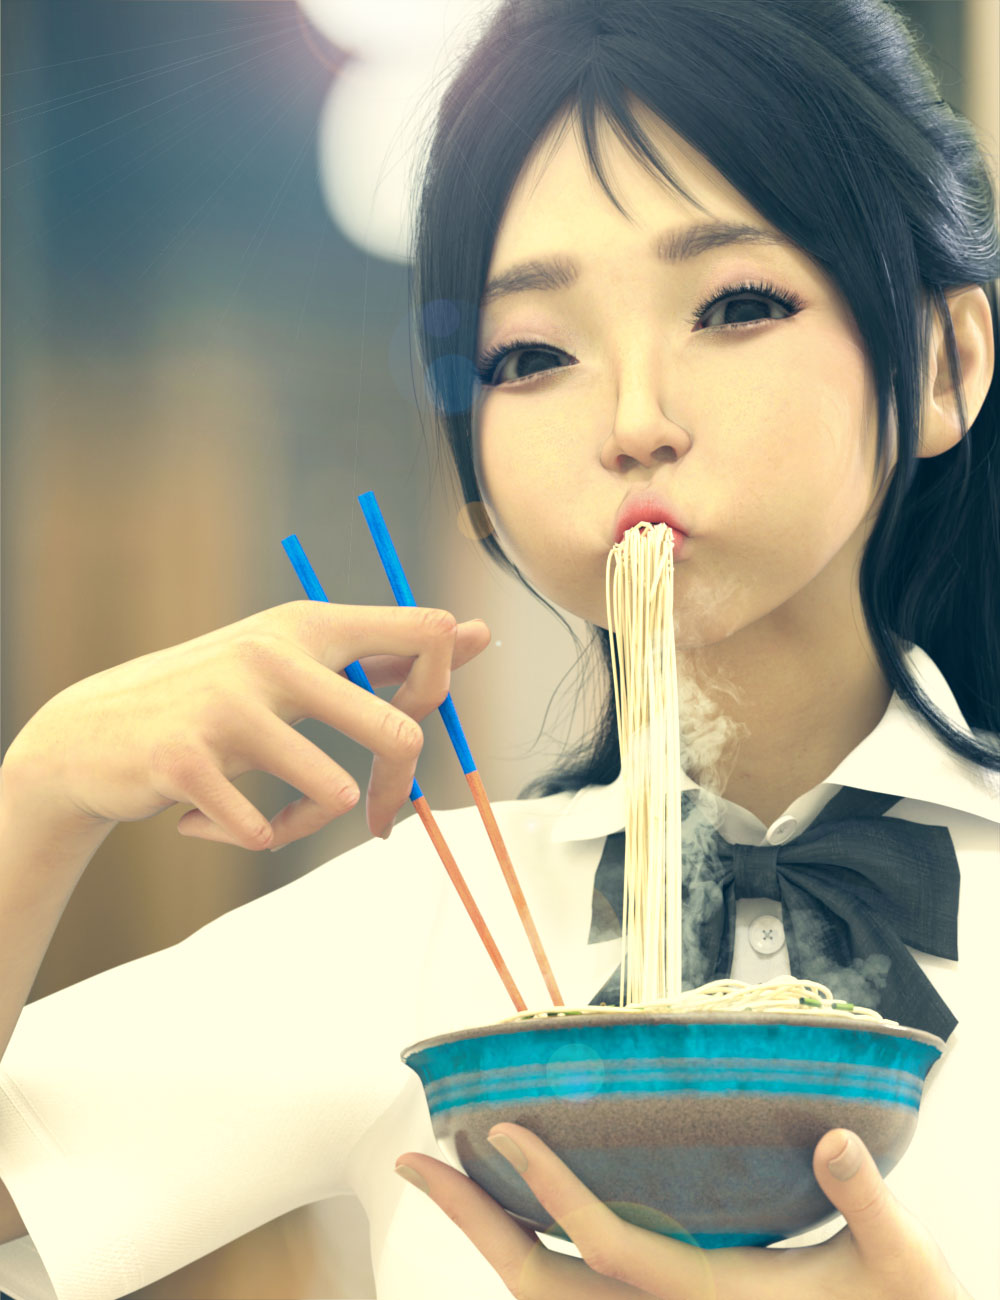 Noodles Props and Poses by: Ansiko, 3D Models by Daz 3D